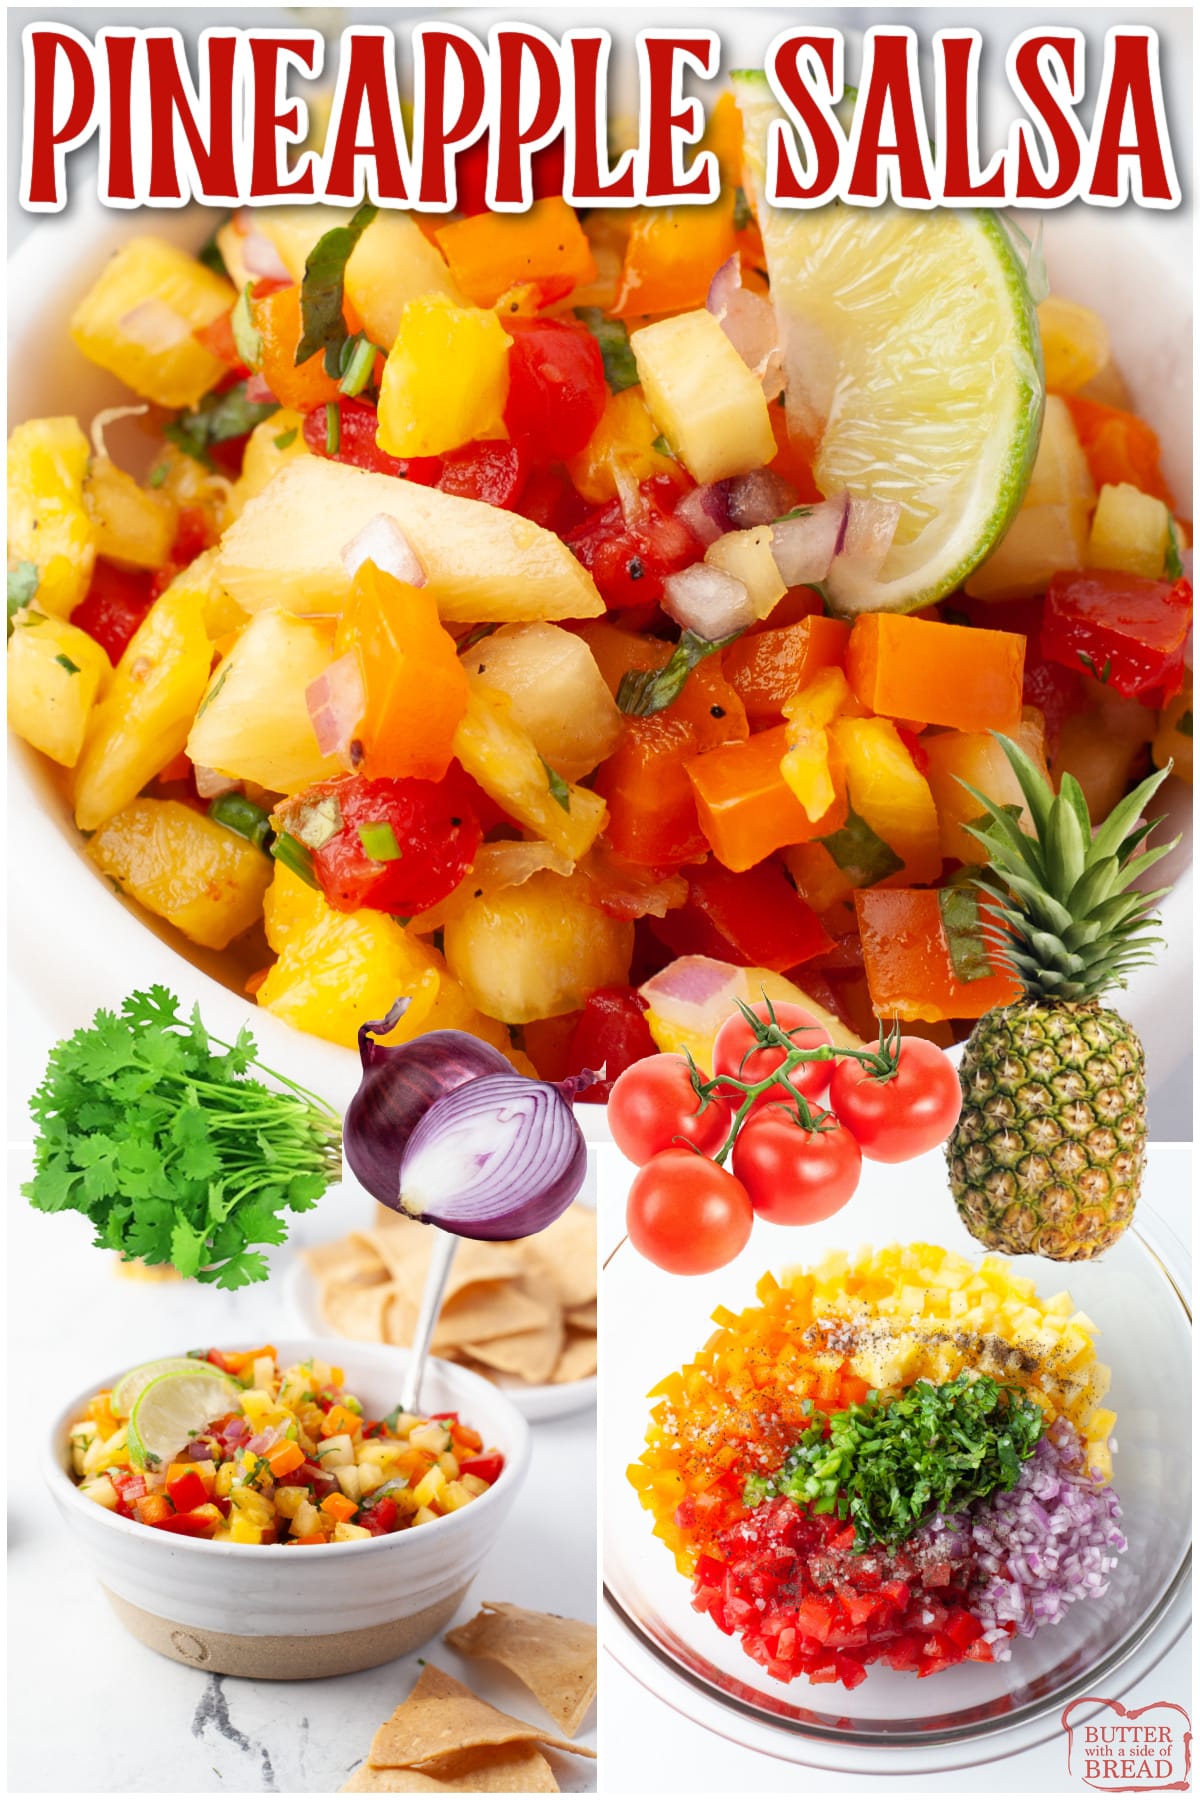 Pineapple Salsa made with fresh pineapple, tomatoes, red onion and bell peppers. This easy salsa recipe is fresh, flavorful and absolutely perfect for a weekend BBQ or weeknight meal. 